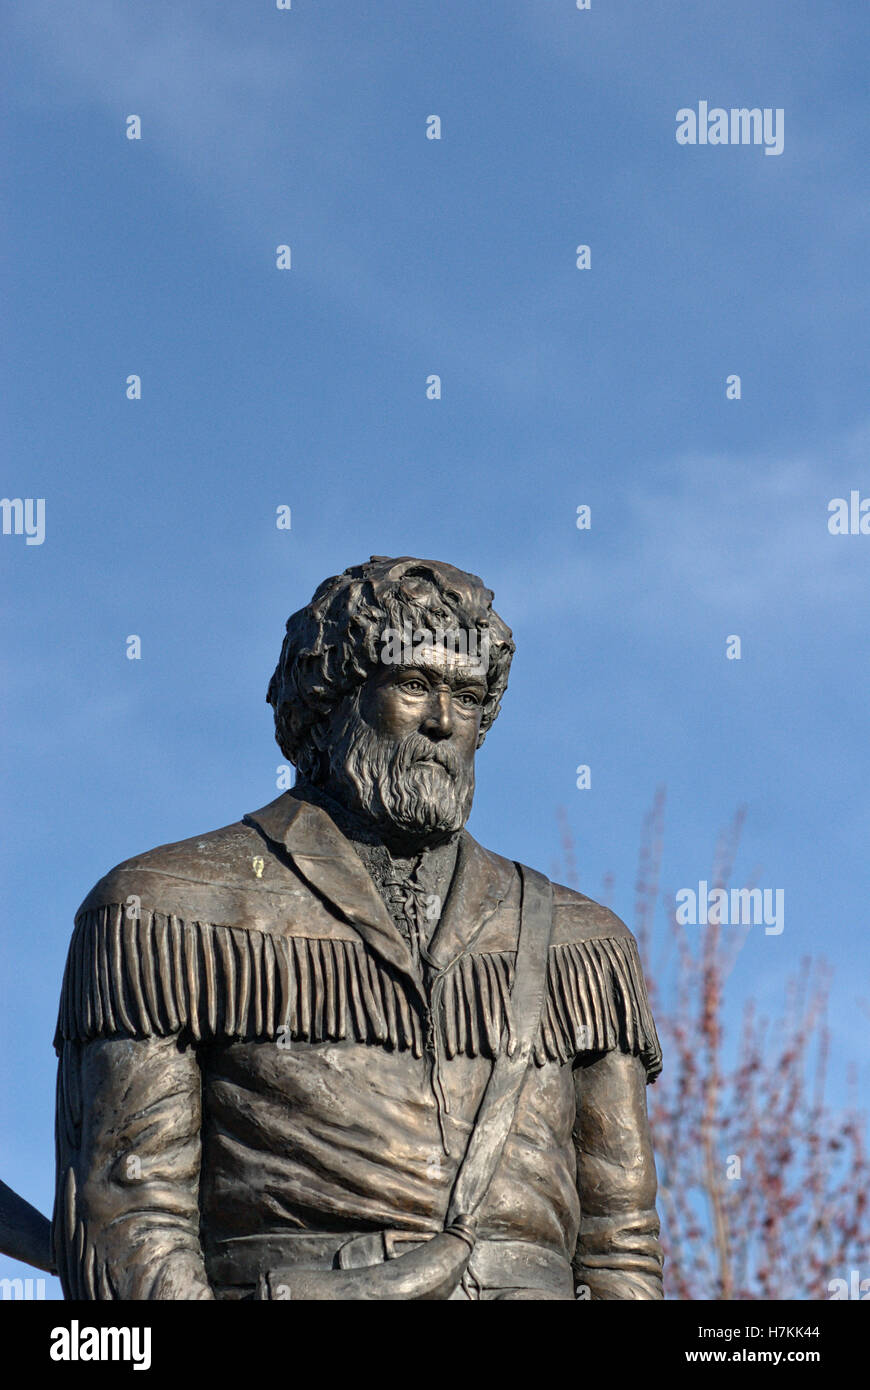 Morgantown, West Virginia, USA - Sculpture of the West Virginia University Mountaineer in front of the WVU Alumni Association building. Stock Photo